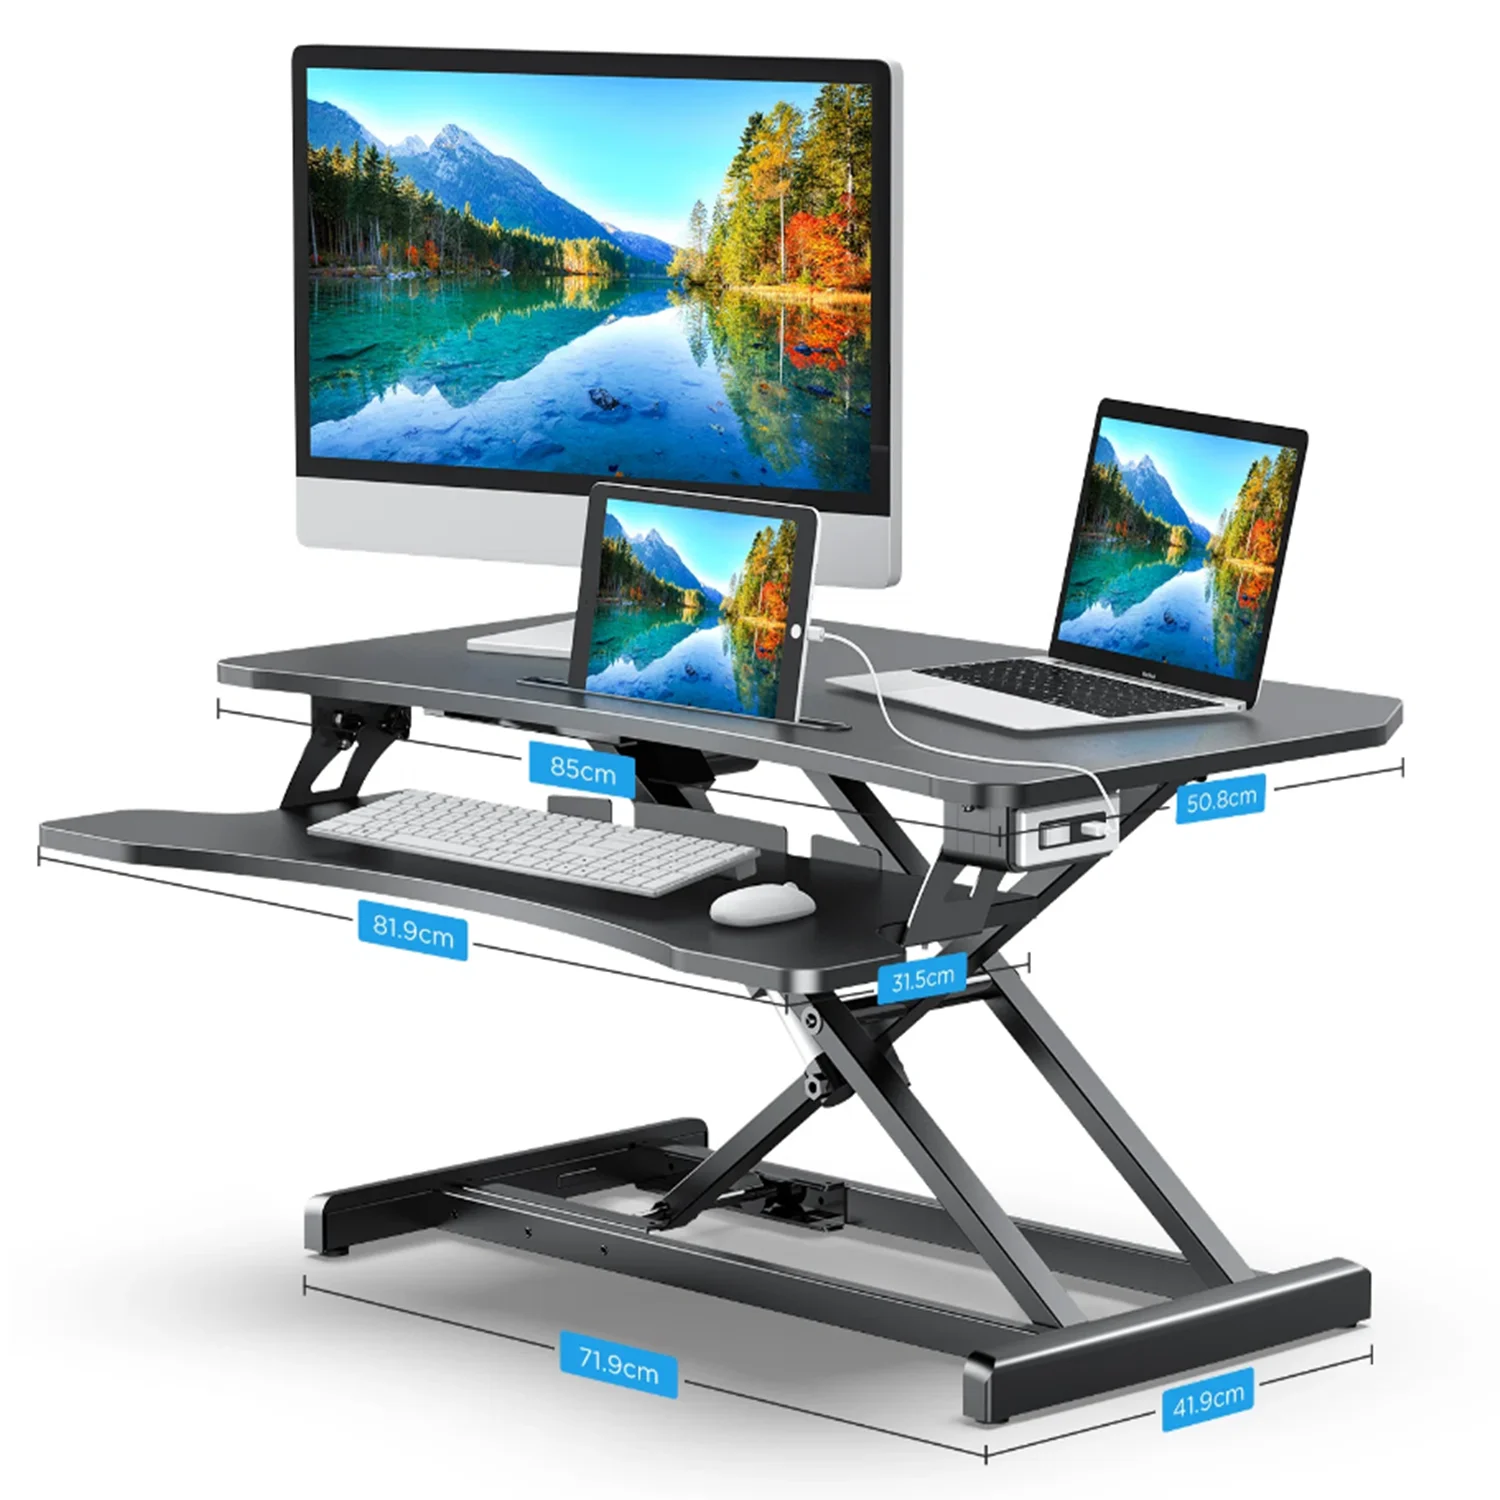 https://ae01.alicdn.com/kf/S1e8c58bc6ff641429945bbc160396b301/ABOX-Standing-Desk-Sit-Stand-Desk-Converter-Height-Adjustable-with-Deep-Keyboard-Tray-Sit-to-Stand.png